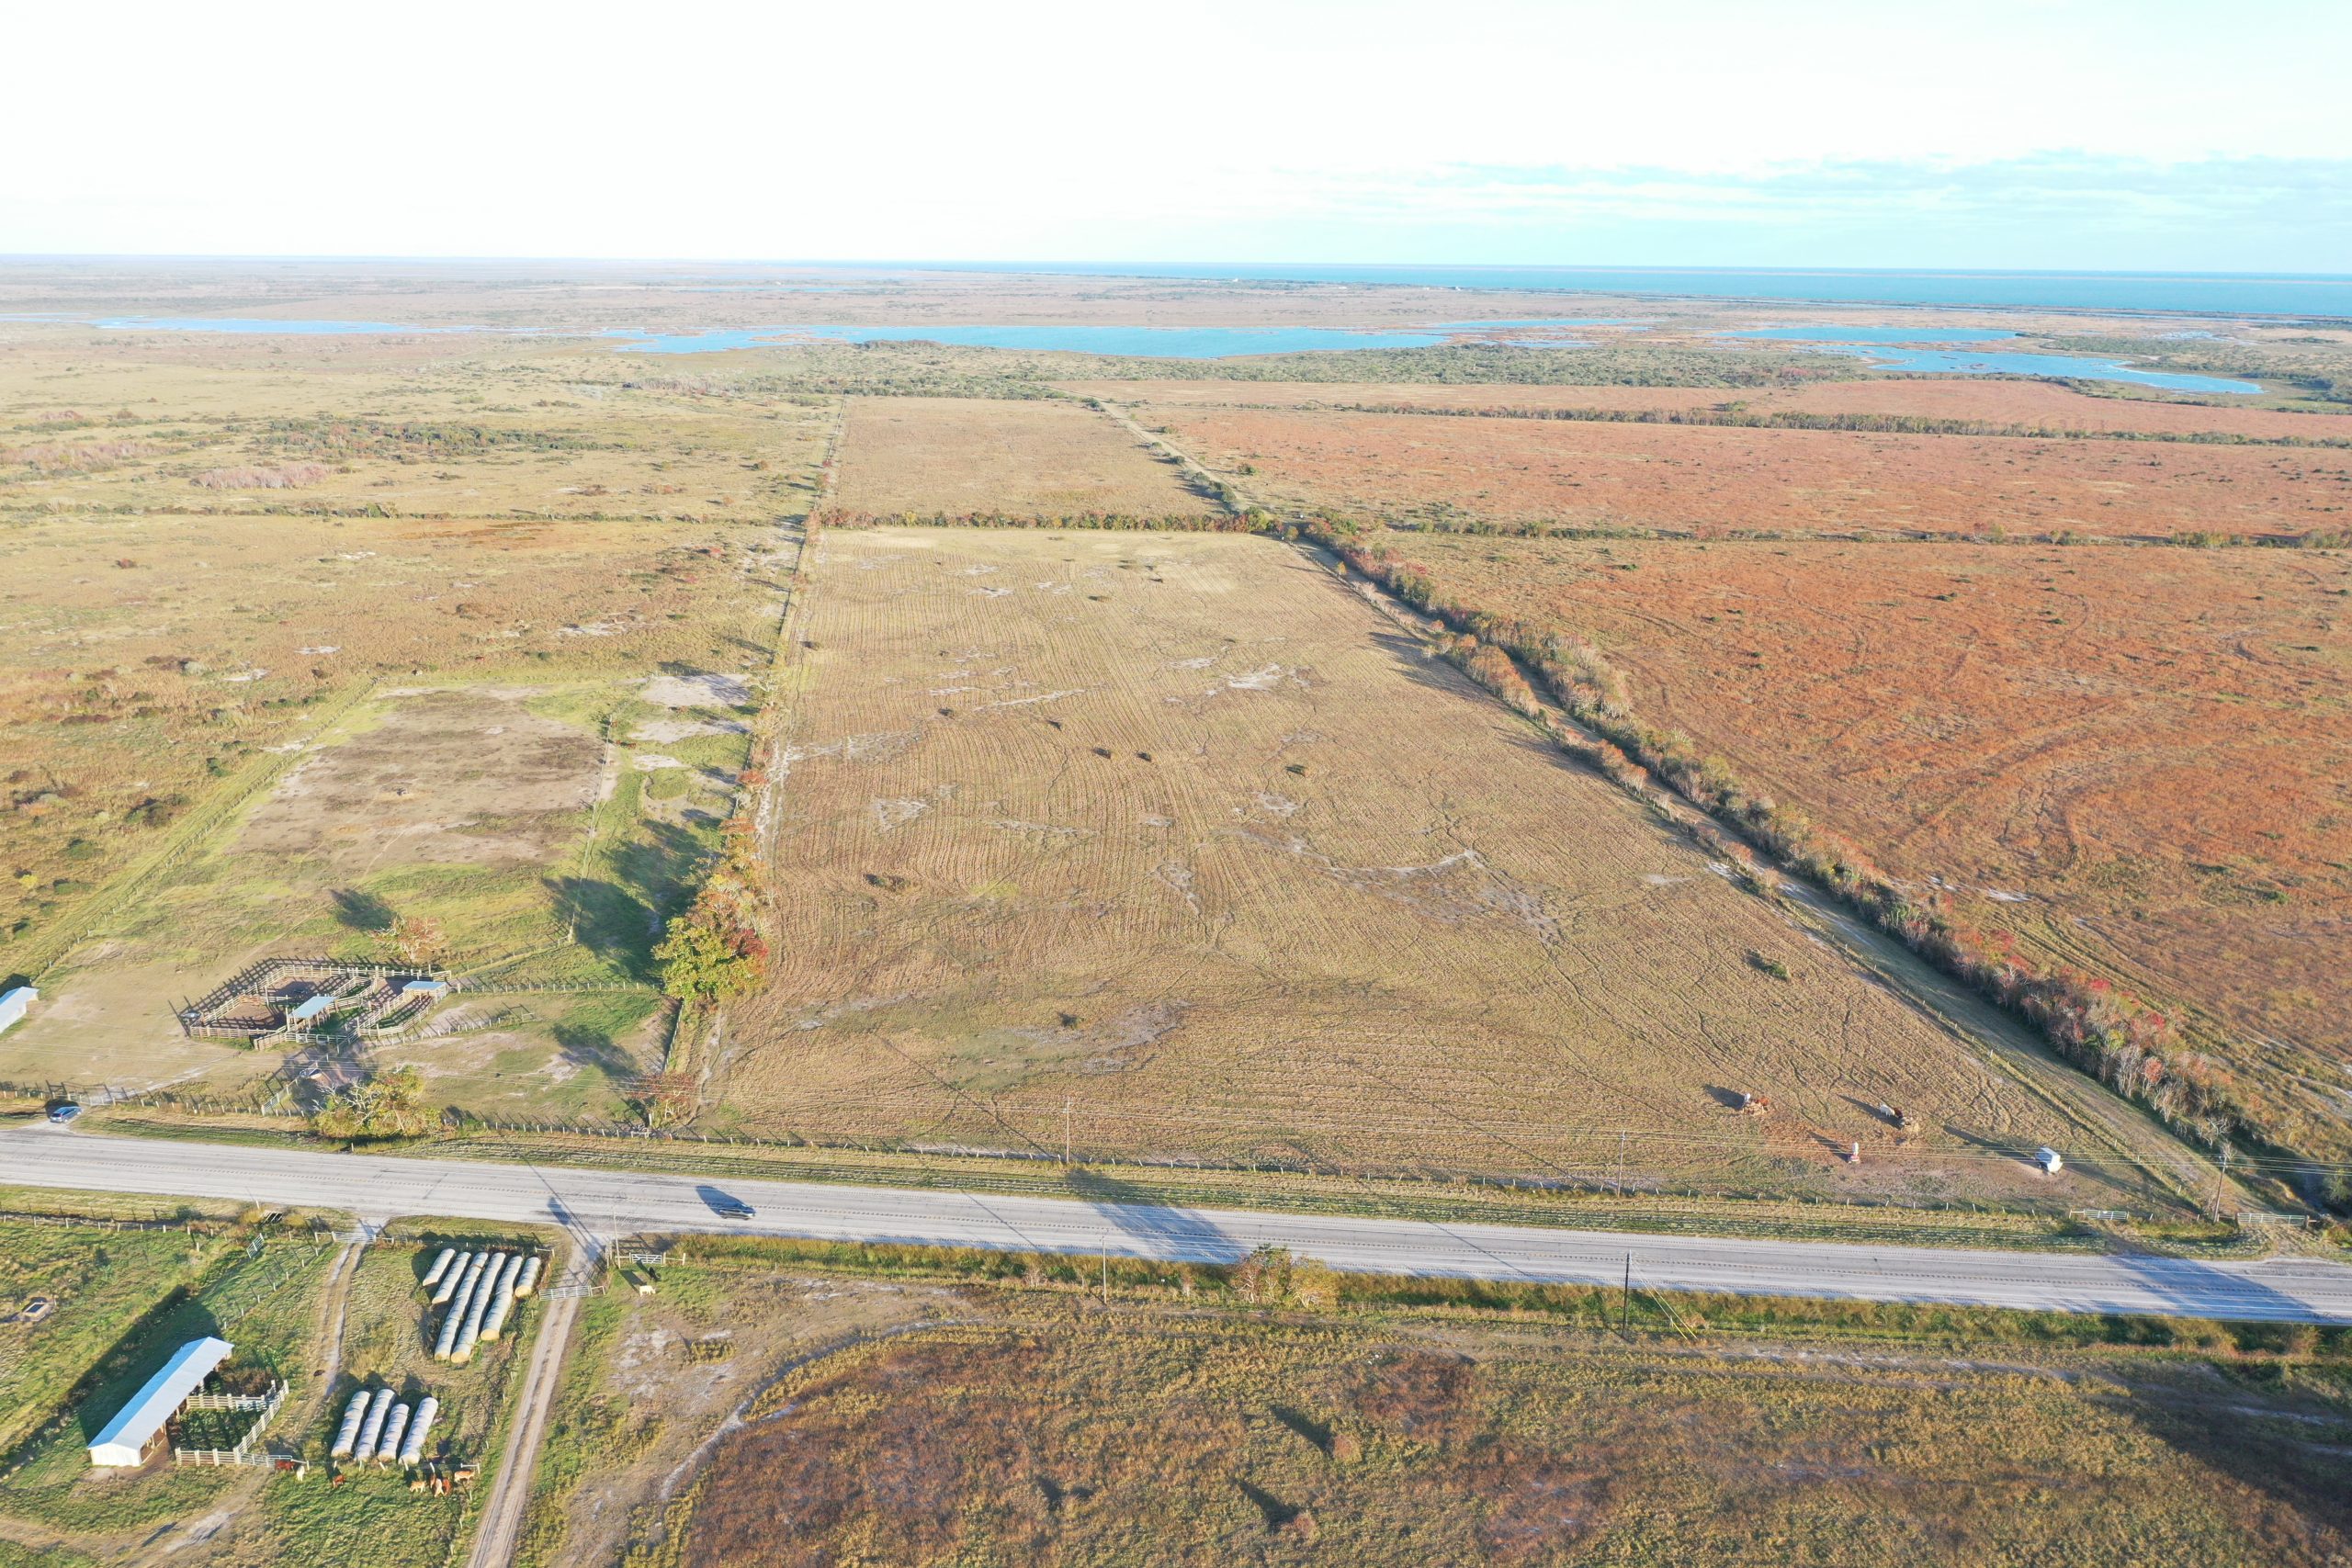 70 +/- Acres on HWY 60 South between Matagorda and Wadsworth